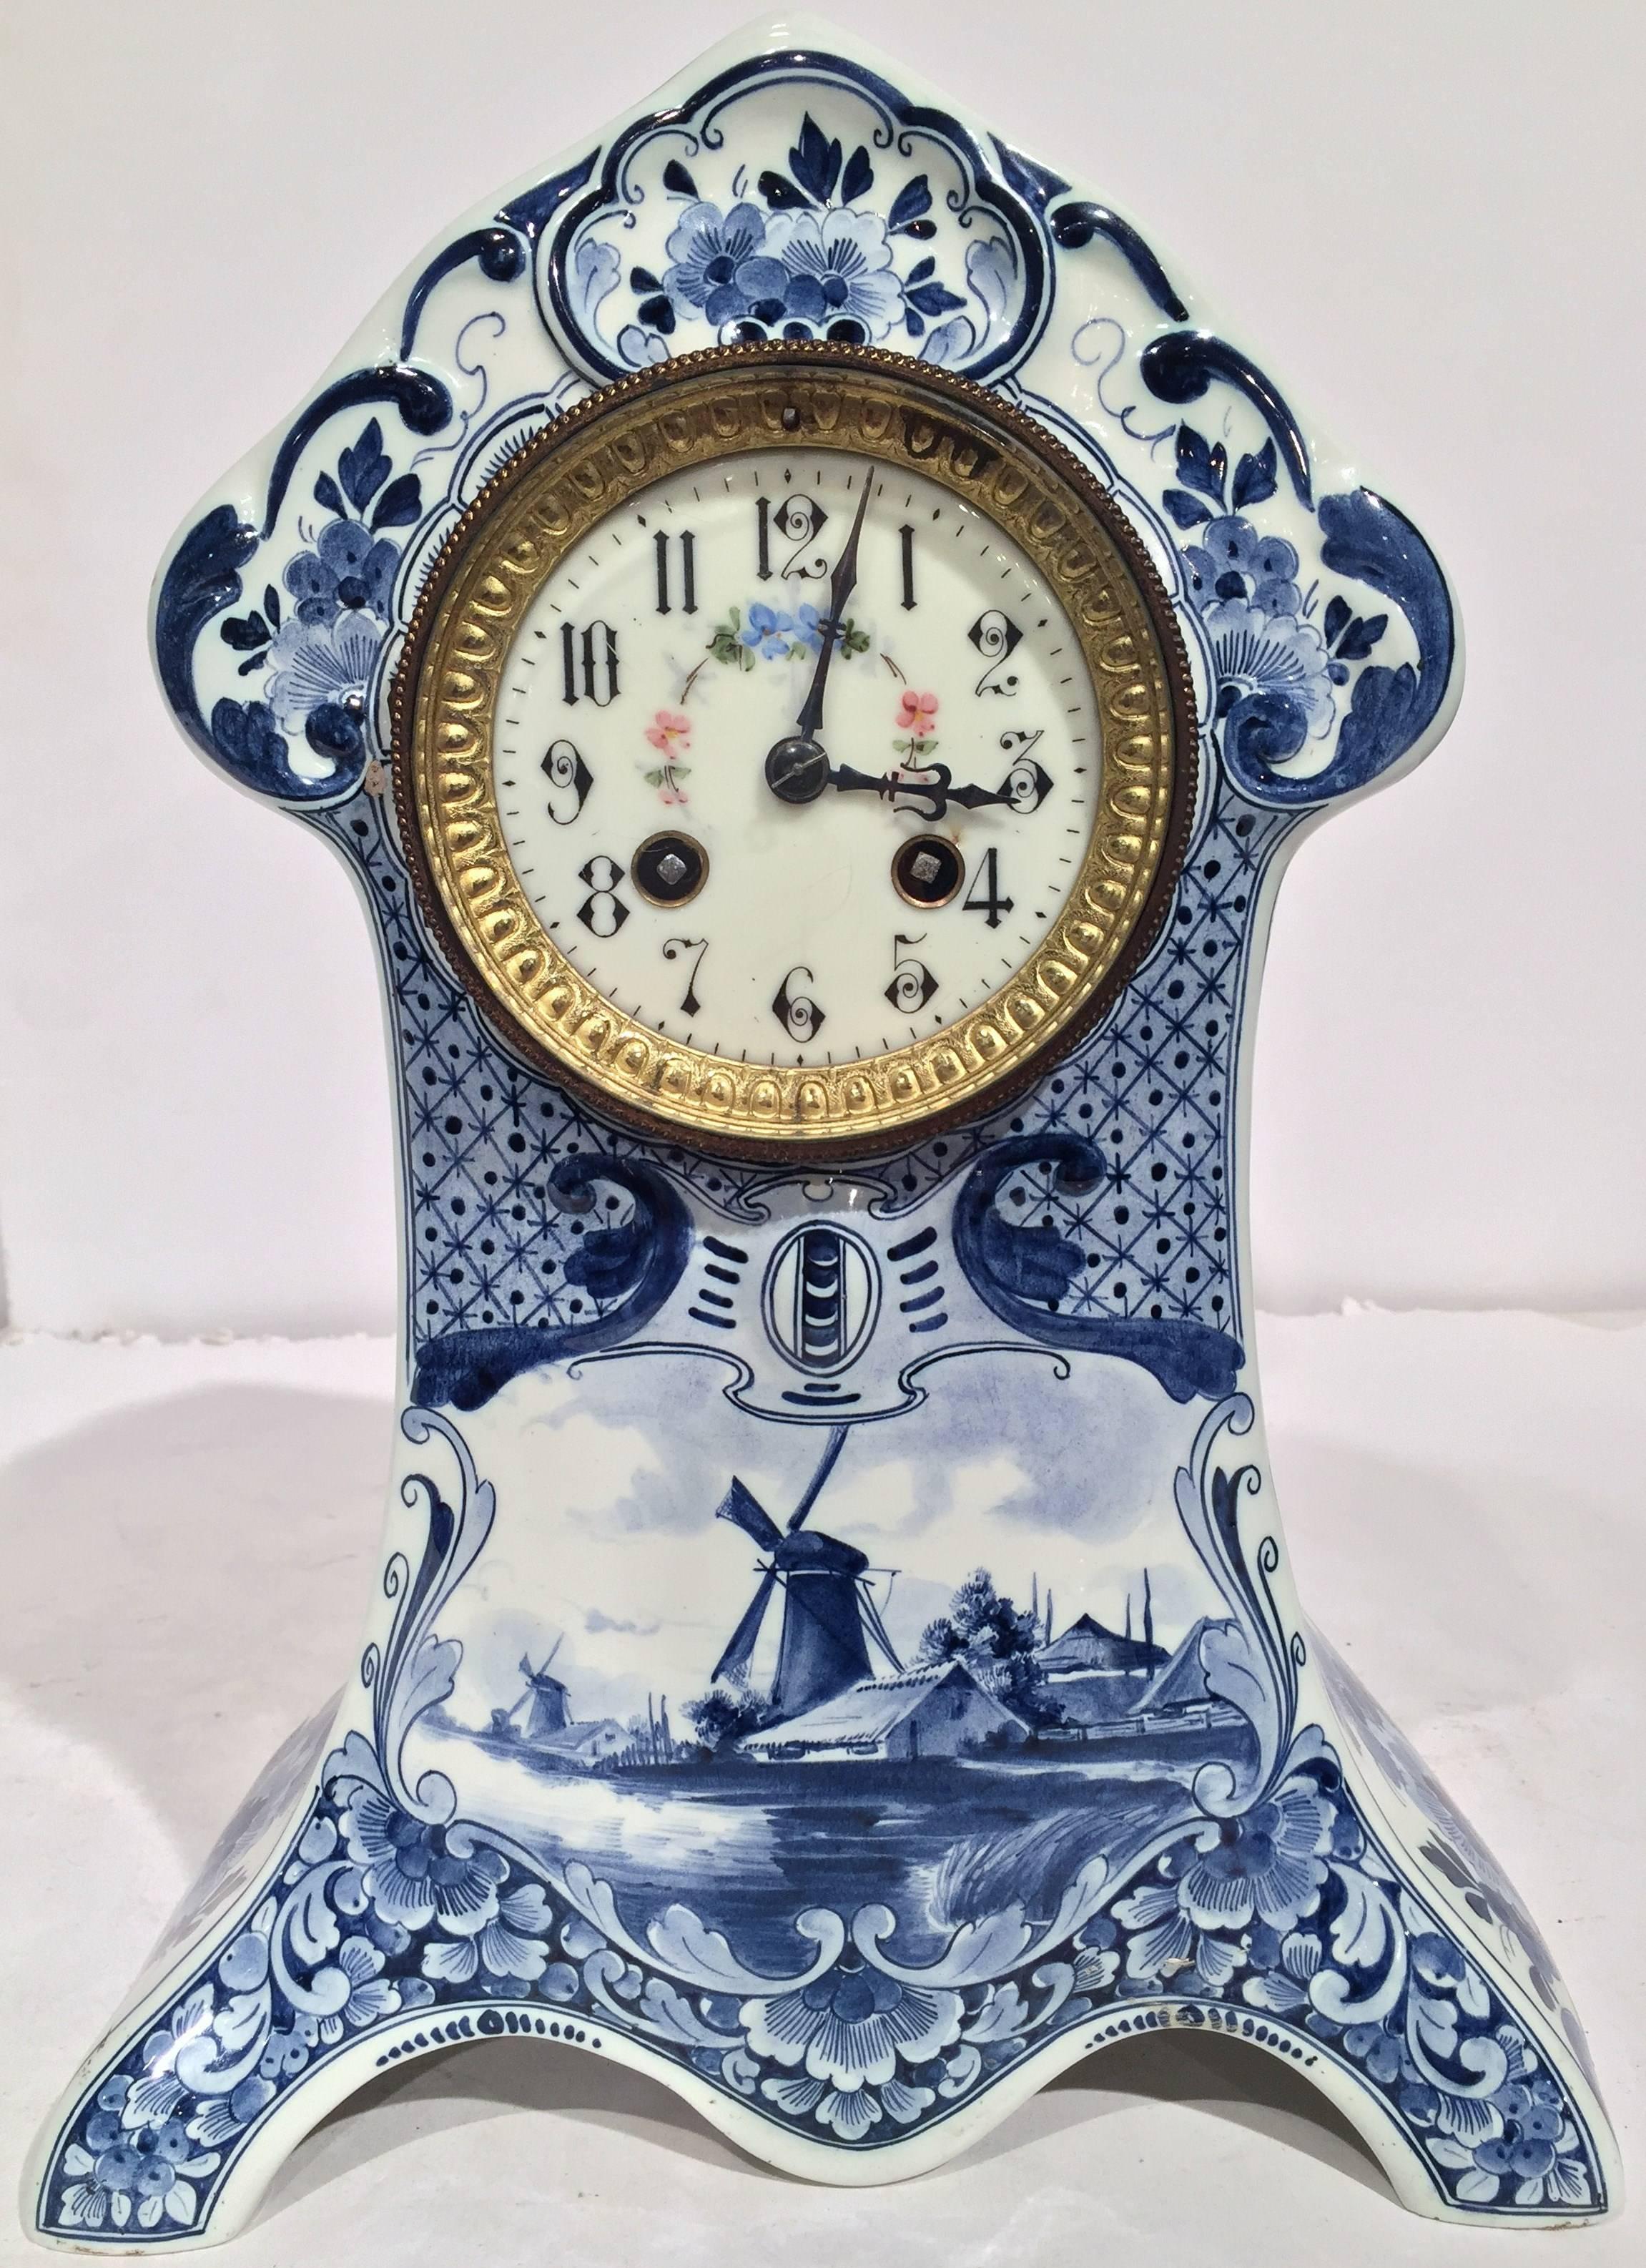 Complete your mantel or desk with this antique, hand painted mantel clock. Created in Holland, circa 1880, the time keeper has its original clock mechanism, which has been professionally cleaned and checked. The table time keeper has a brass rim